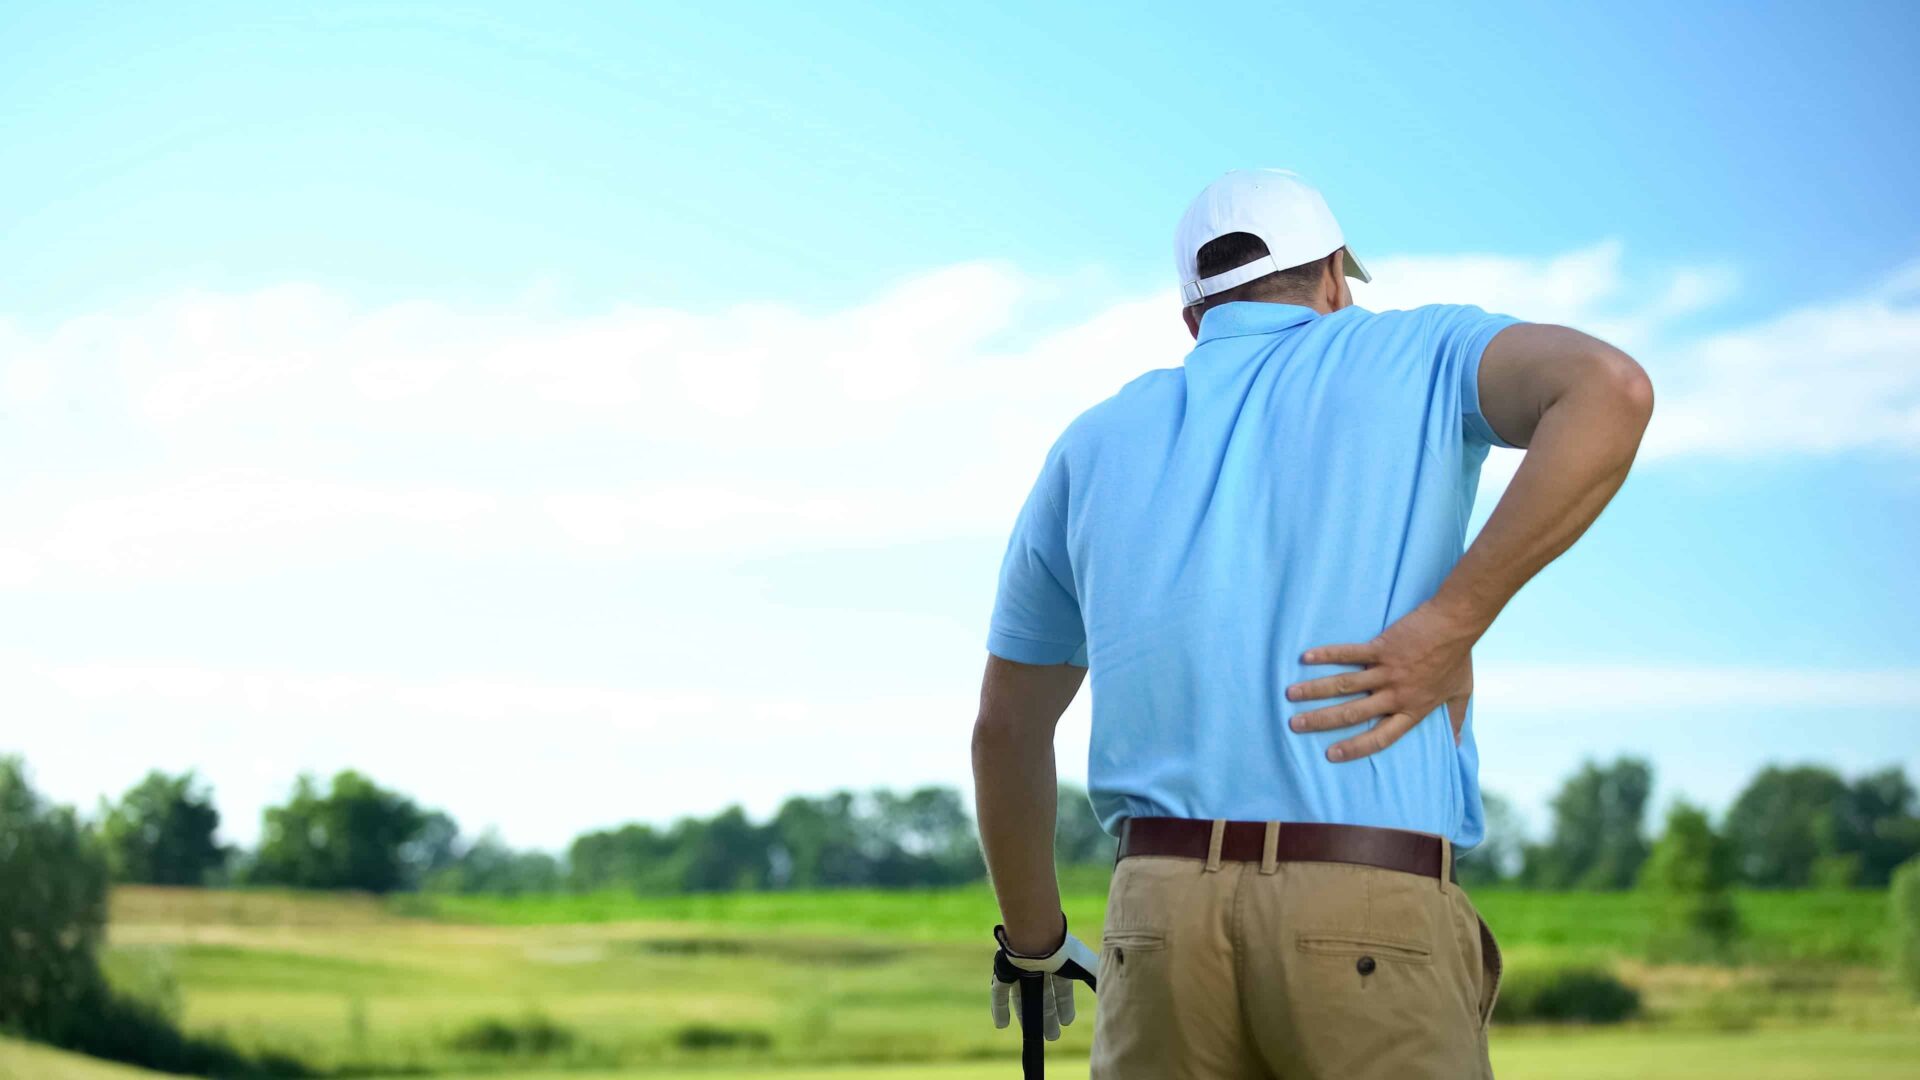 10 Issues That Might be Throwing You Off Your Golf Game